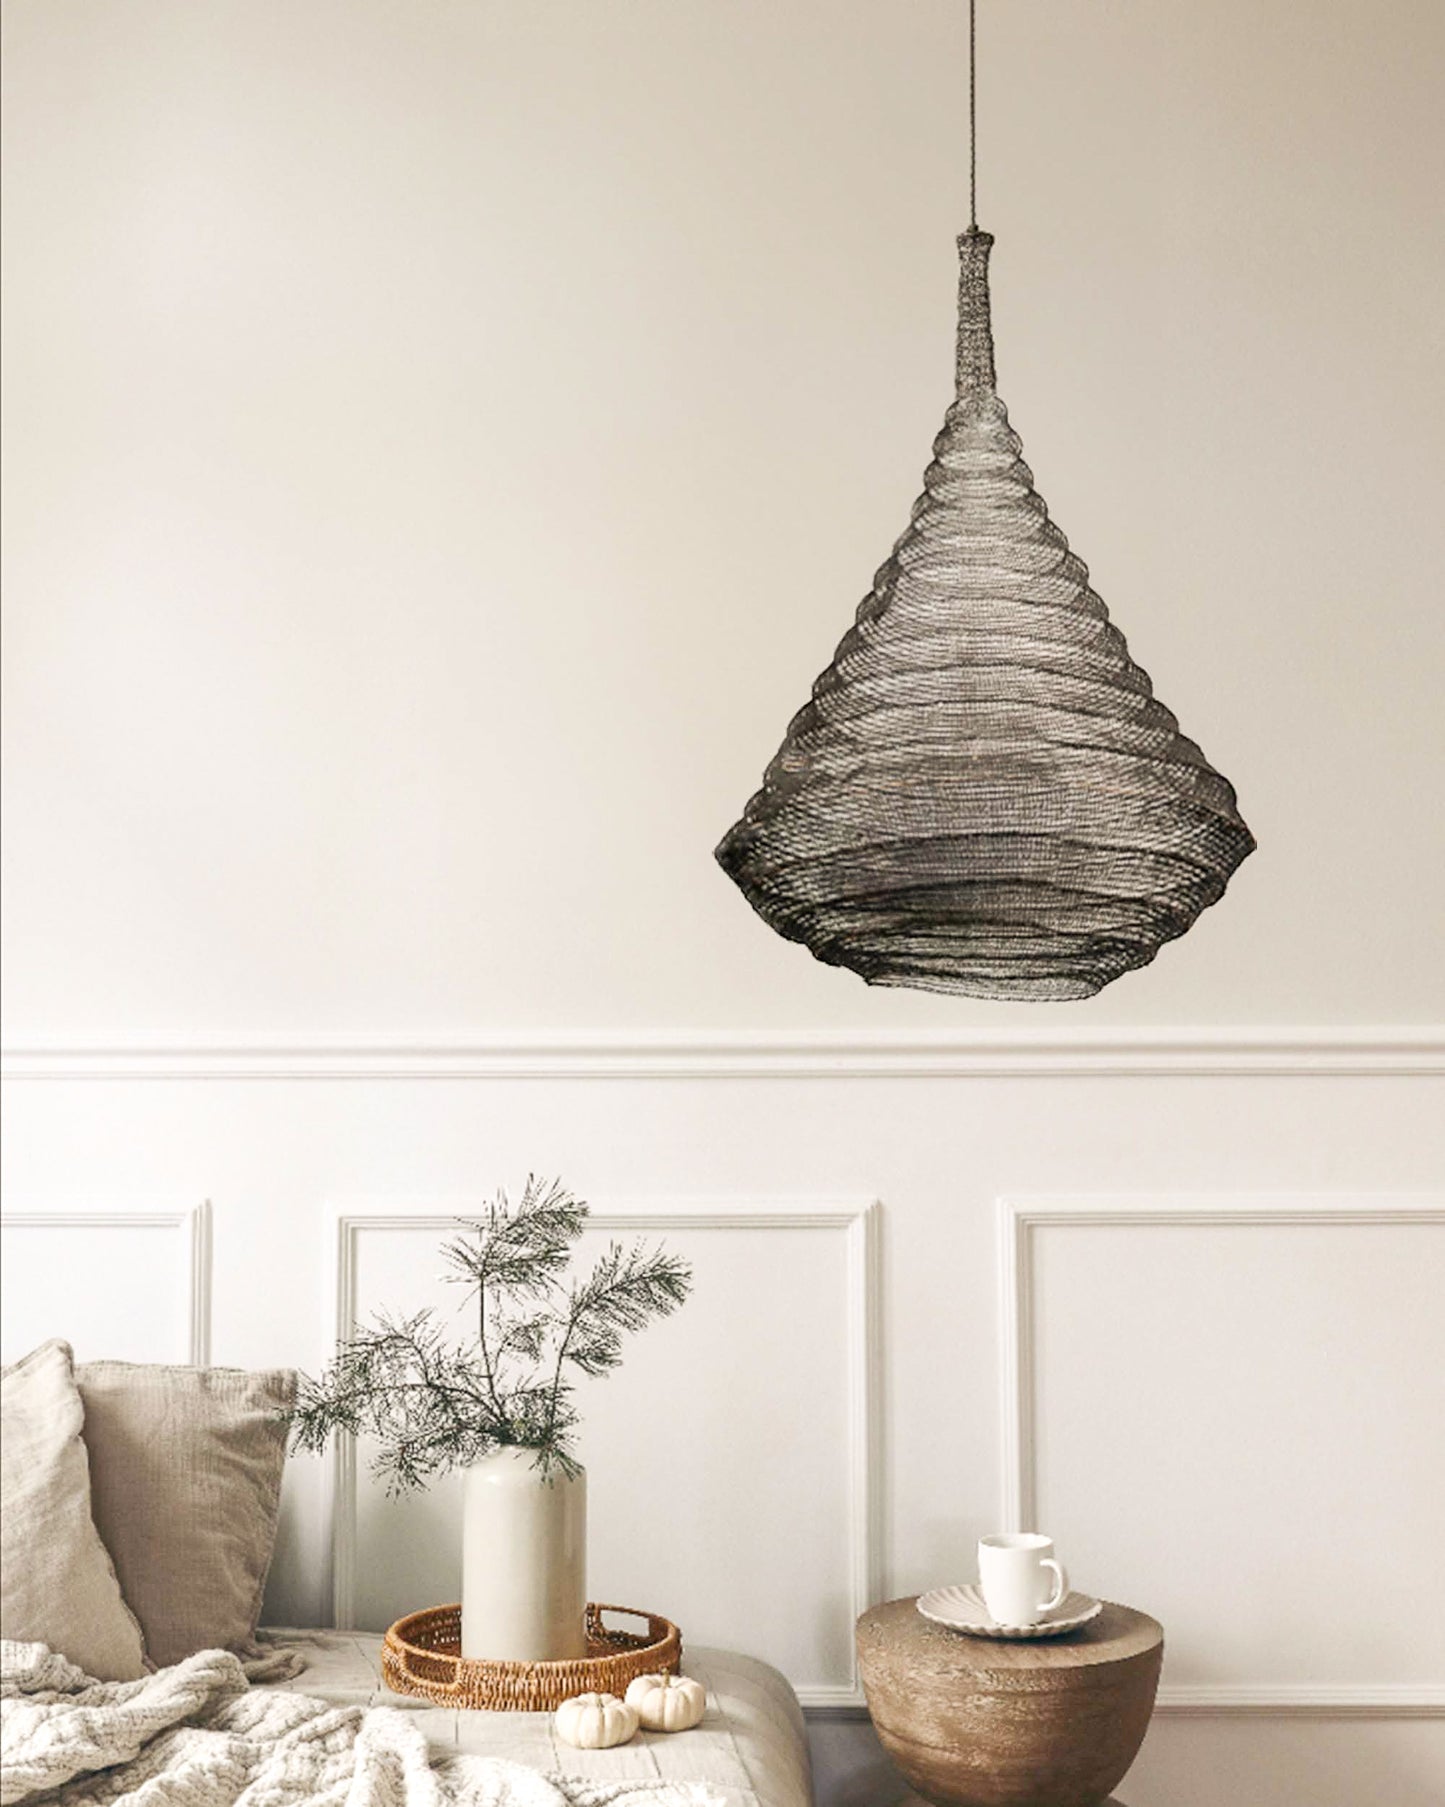 Black wire mesh ceiling light in room